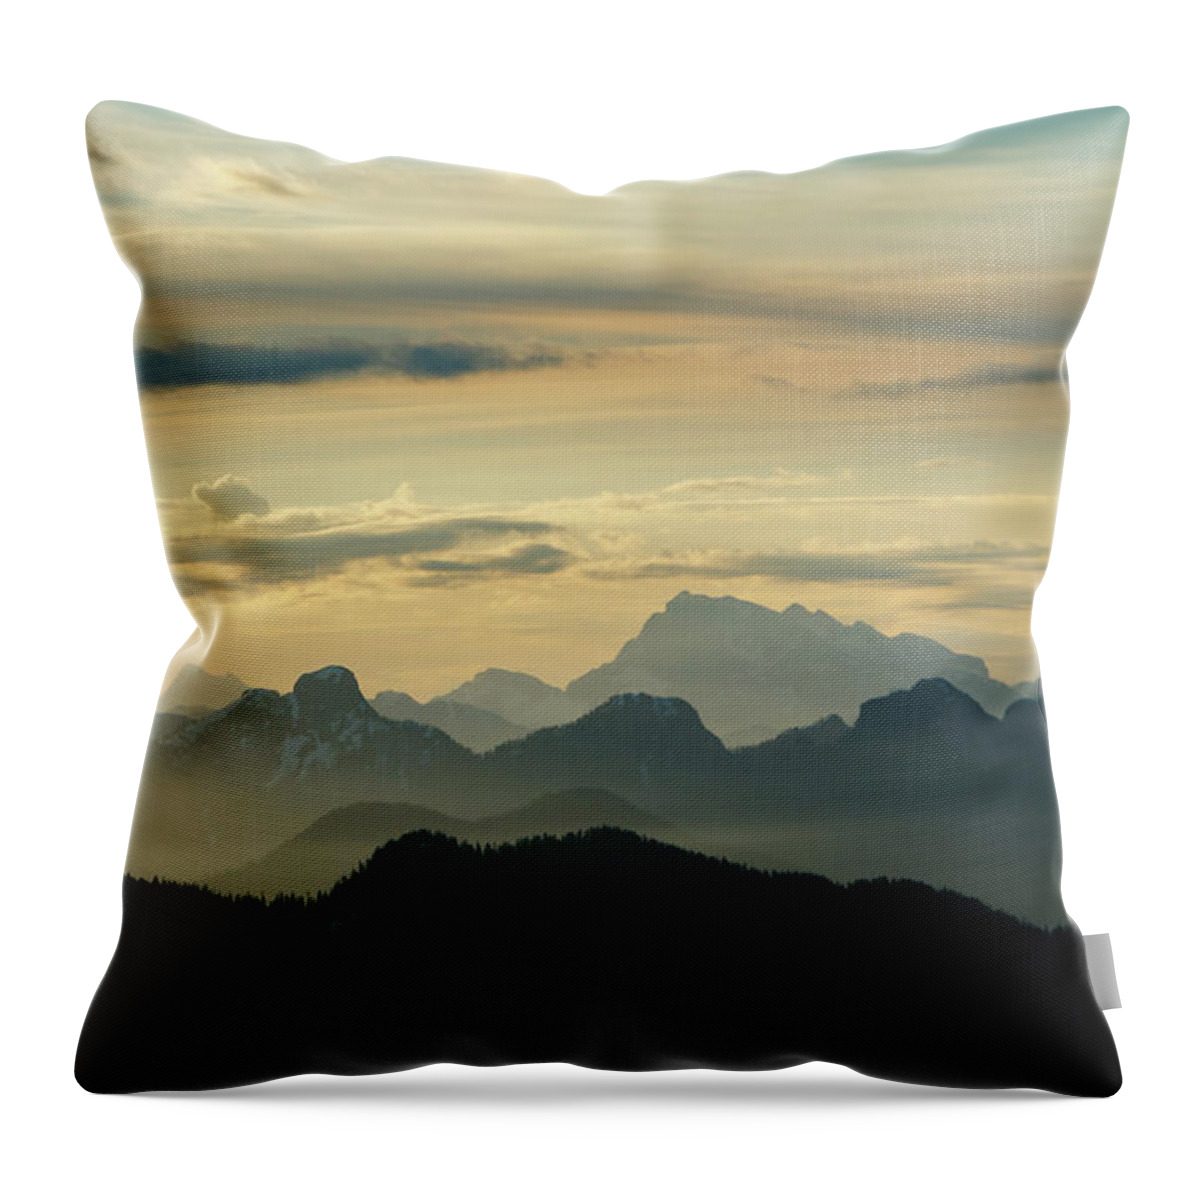 Canada Throw Pillow featuring the photograph View From Mount Seymour by Rick Deacon